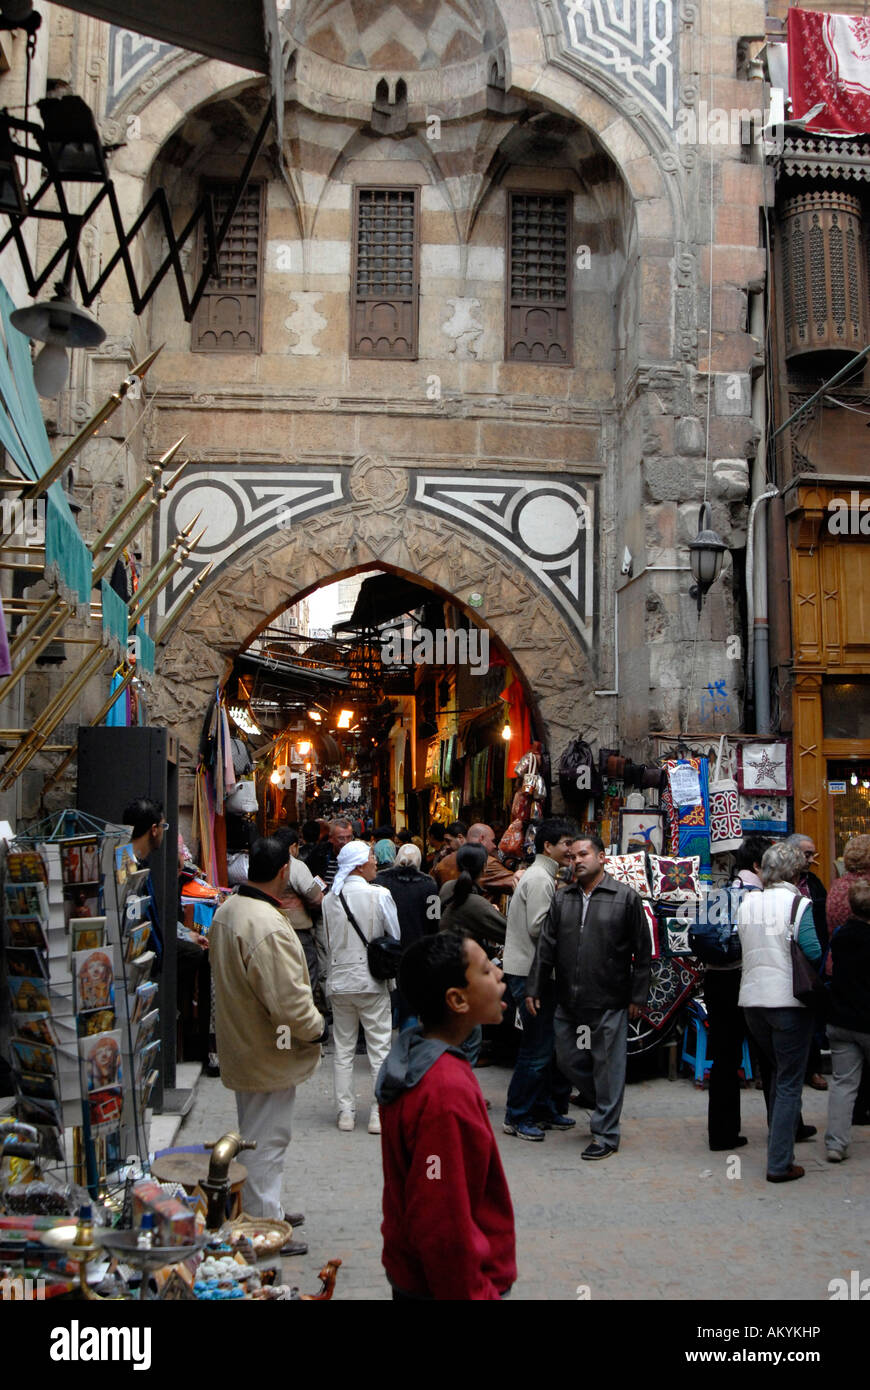 Cairo - Khan al Khalili - old muslim quarter with business and bazaars, Cairo, Egypt Stock Photo